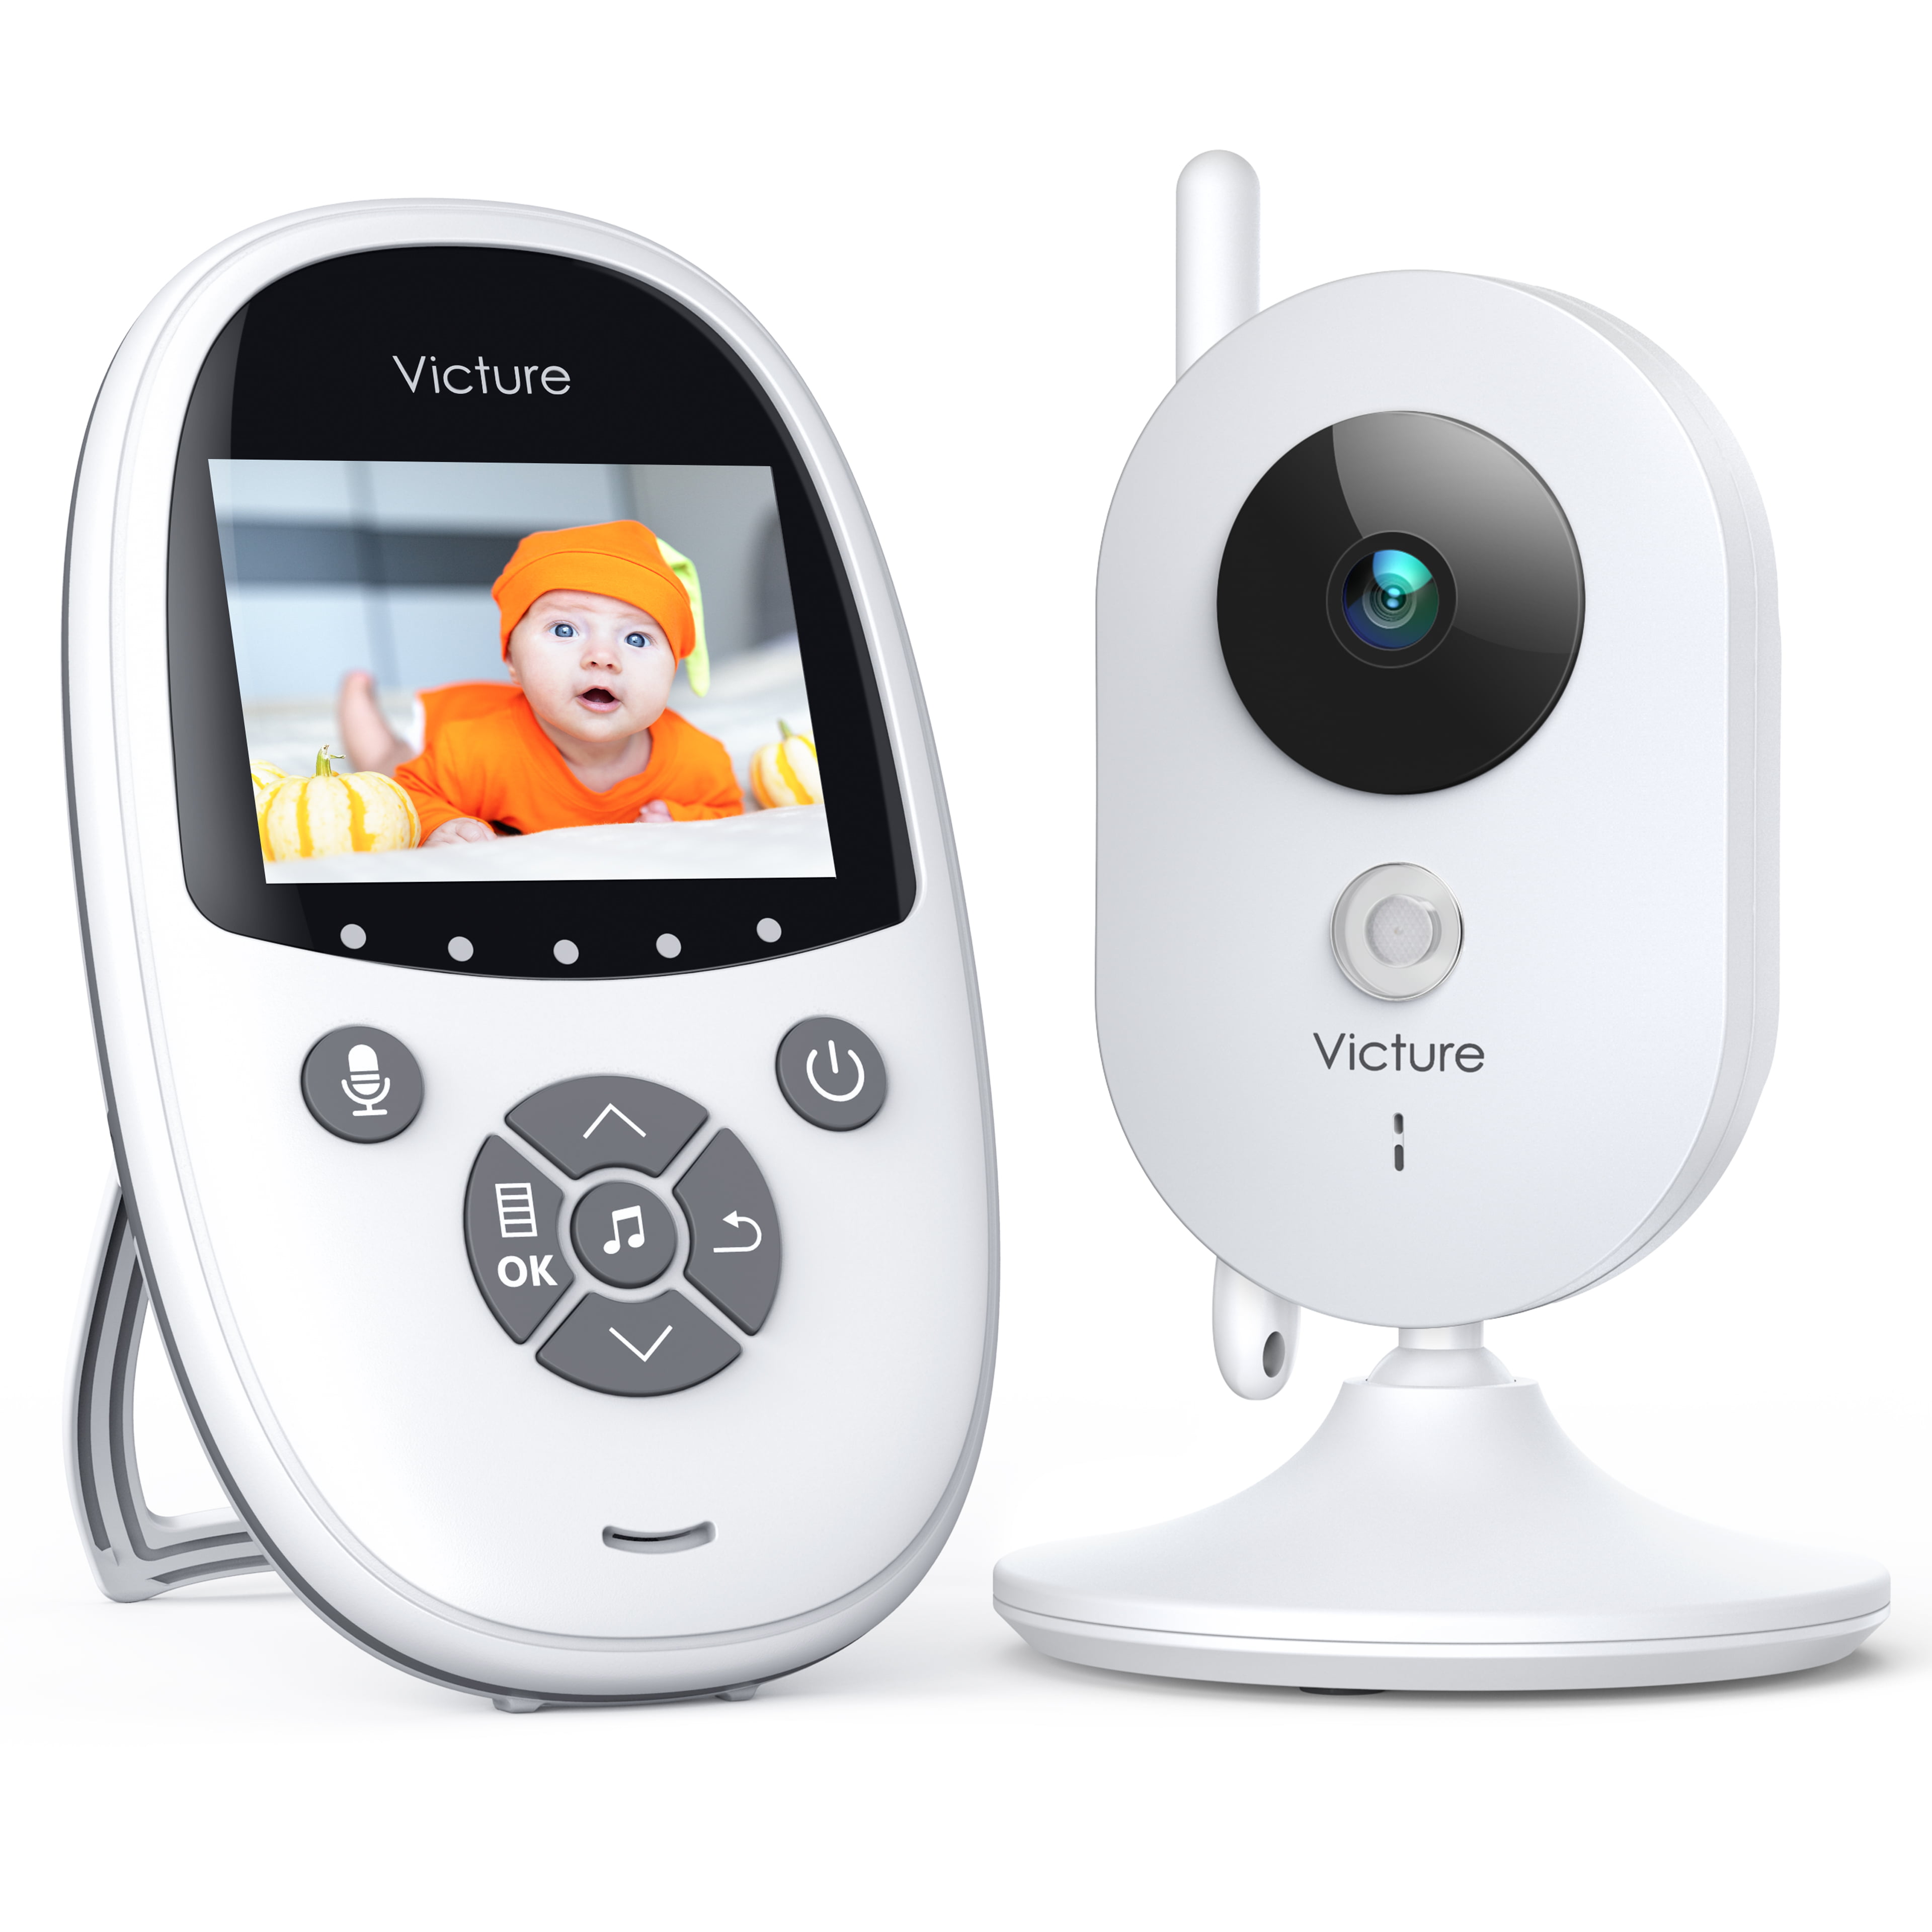 Includes Temperature Display Equipped with Night Vision Mode Exceptional Picture Quality & Audio Perfect Nursery Accessory Pan-Tilt-Zoom Baby Camera High-Performing Baby Monitor with Camera